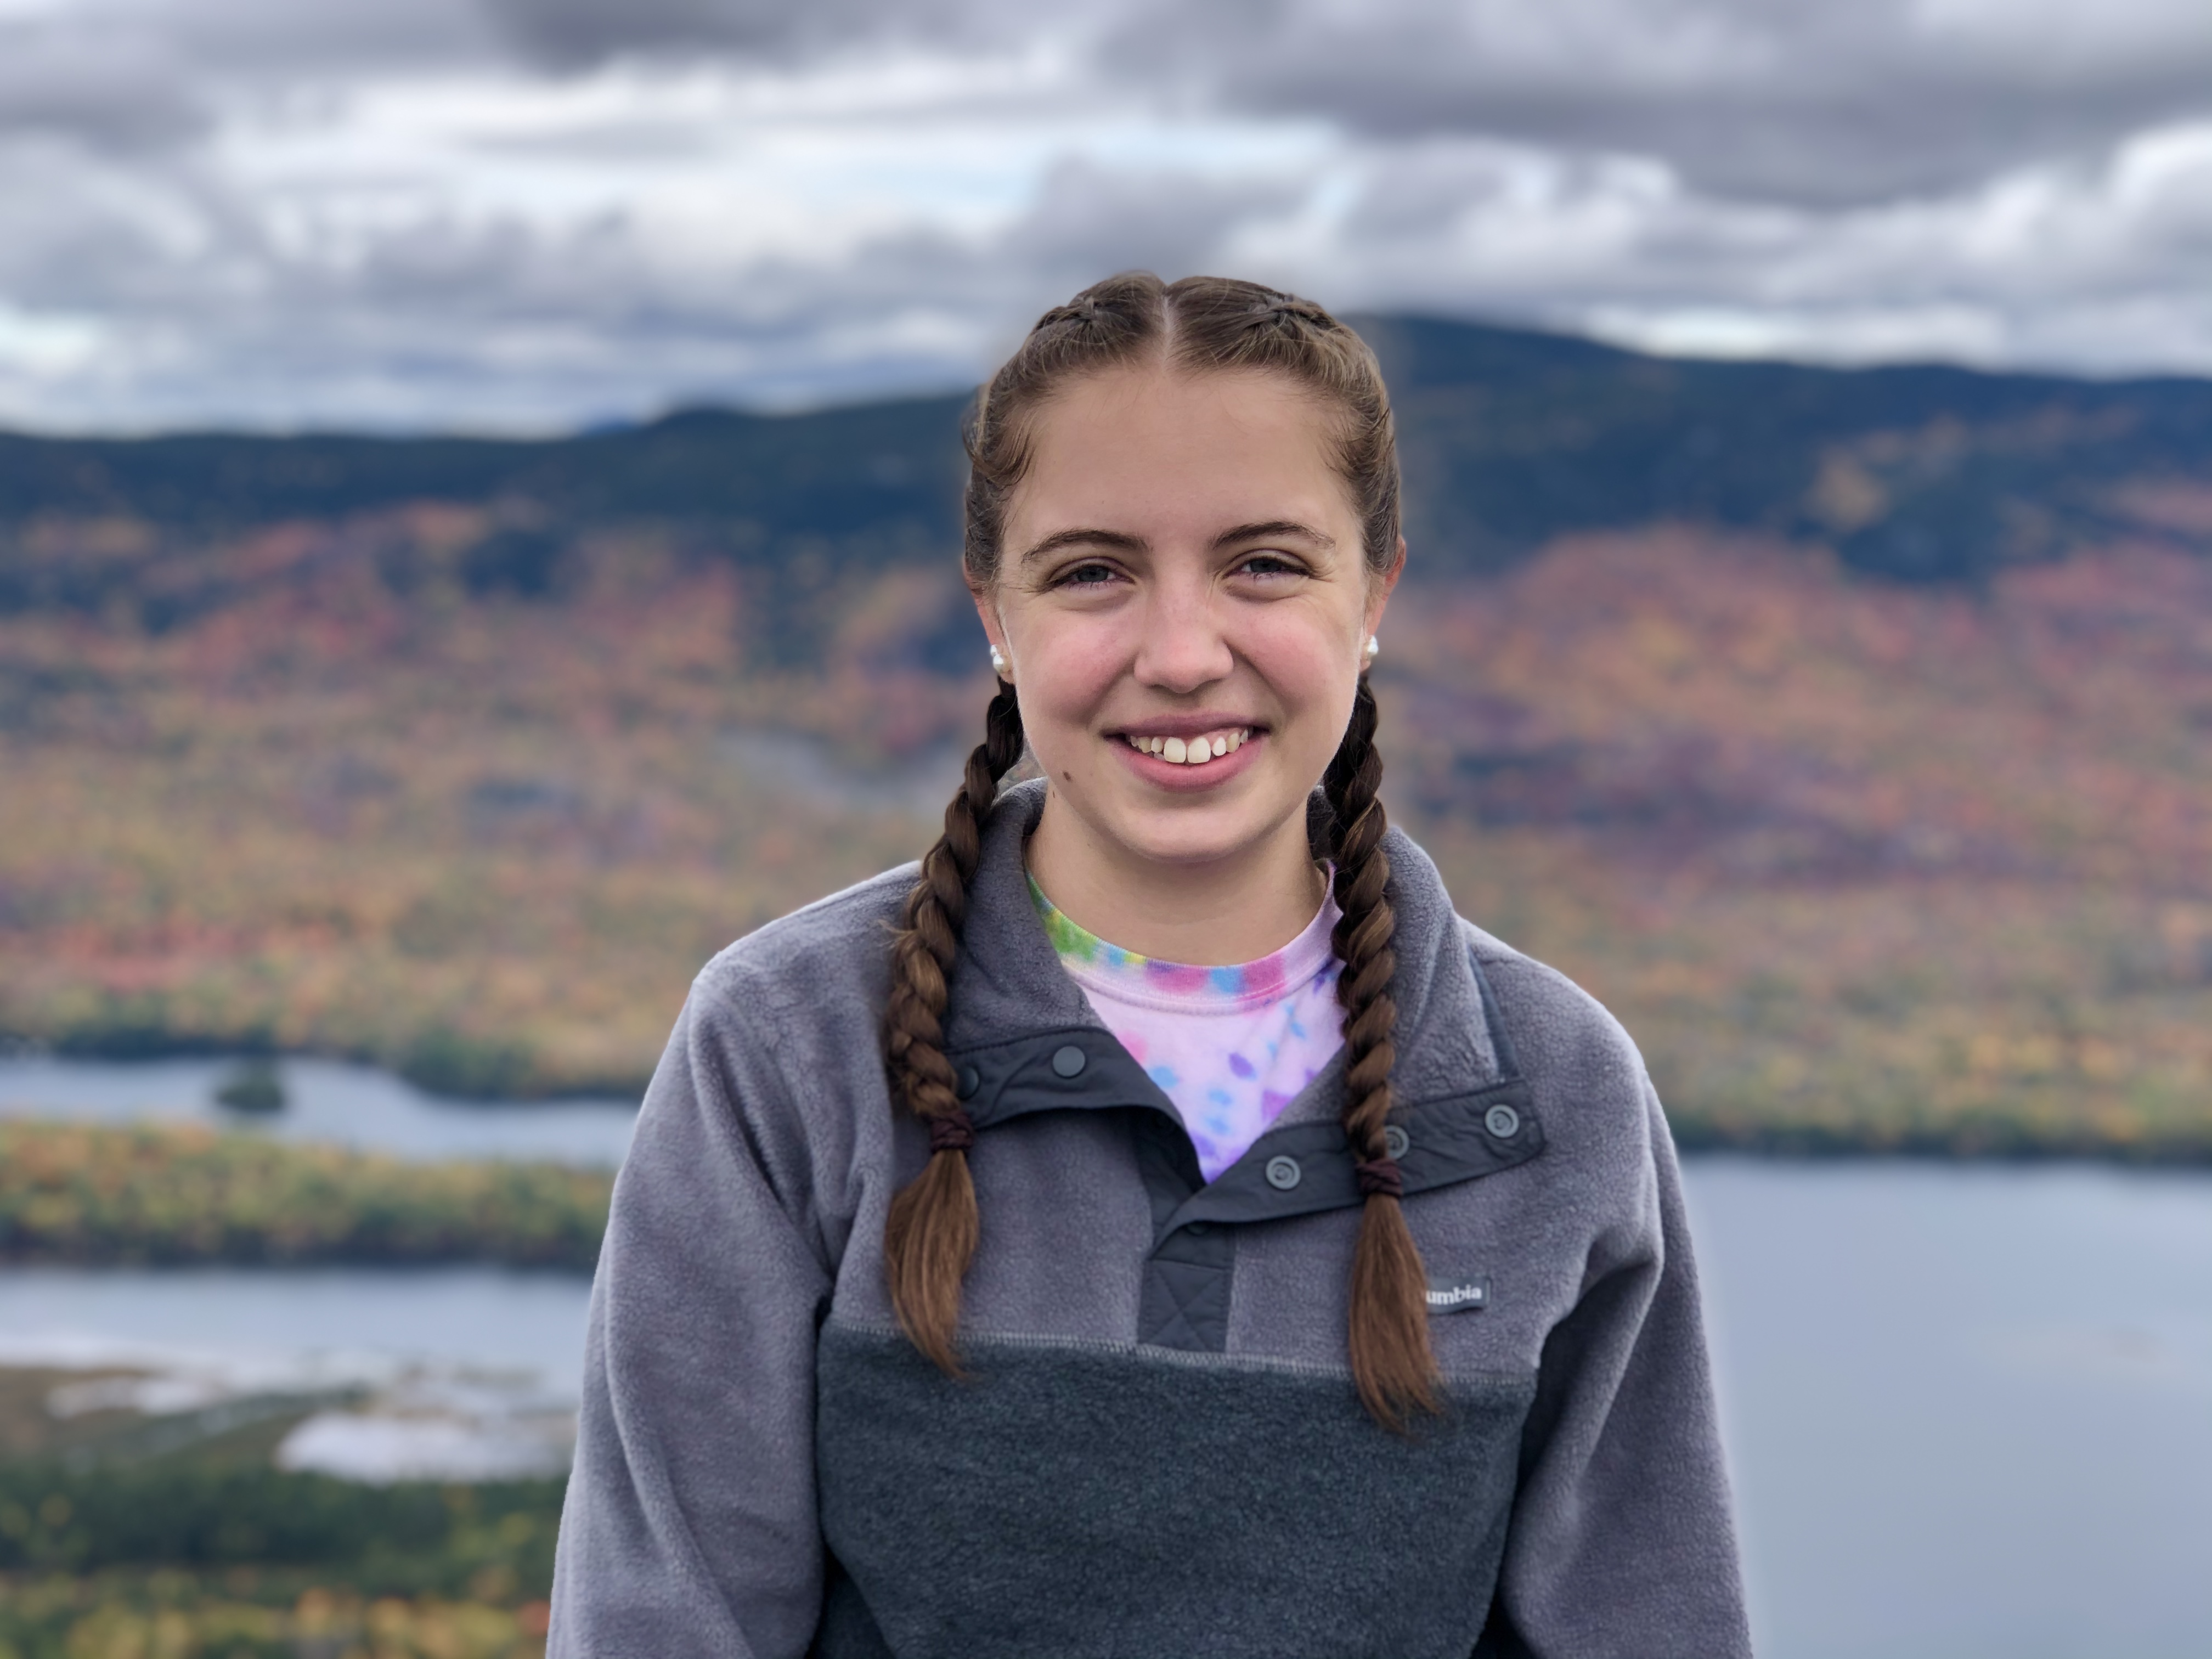 A young white woman stands in the foreground, against a cloudy sky, and in the distance behind her, a lake is framed by a mountain with changing fall foliage. She has long brown hair in braids, she is wearing a gray pullover and smiling at camera. 